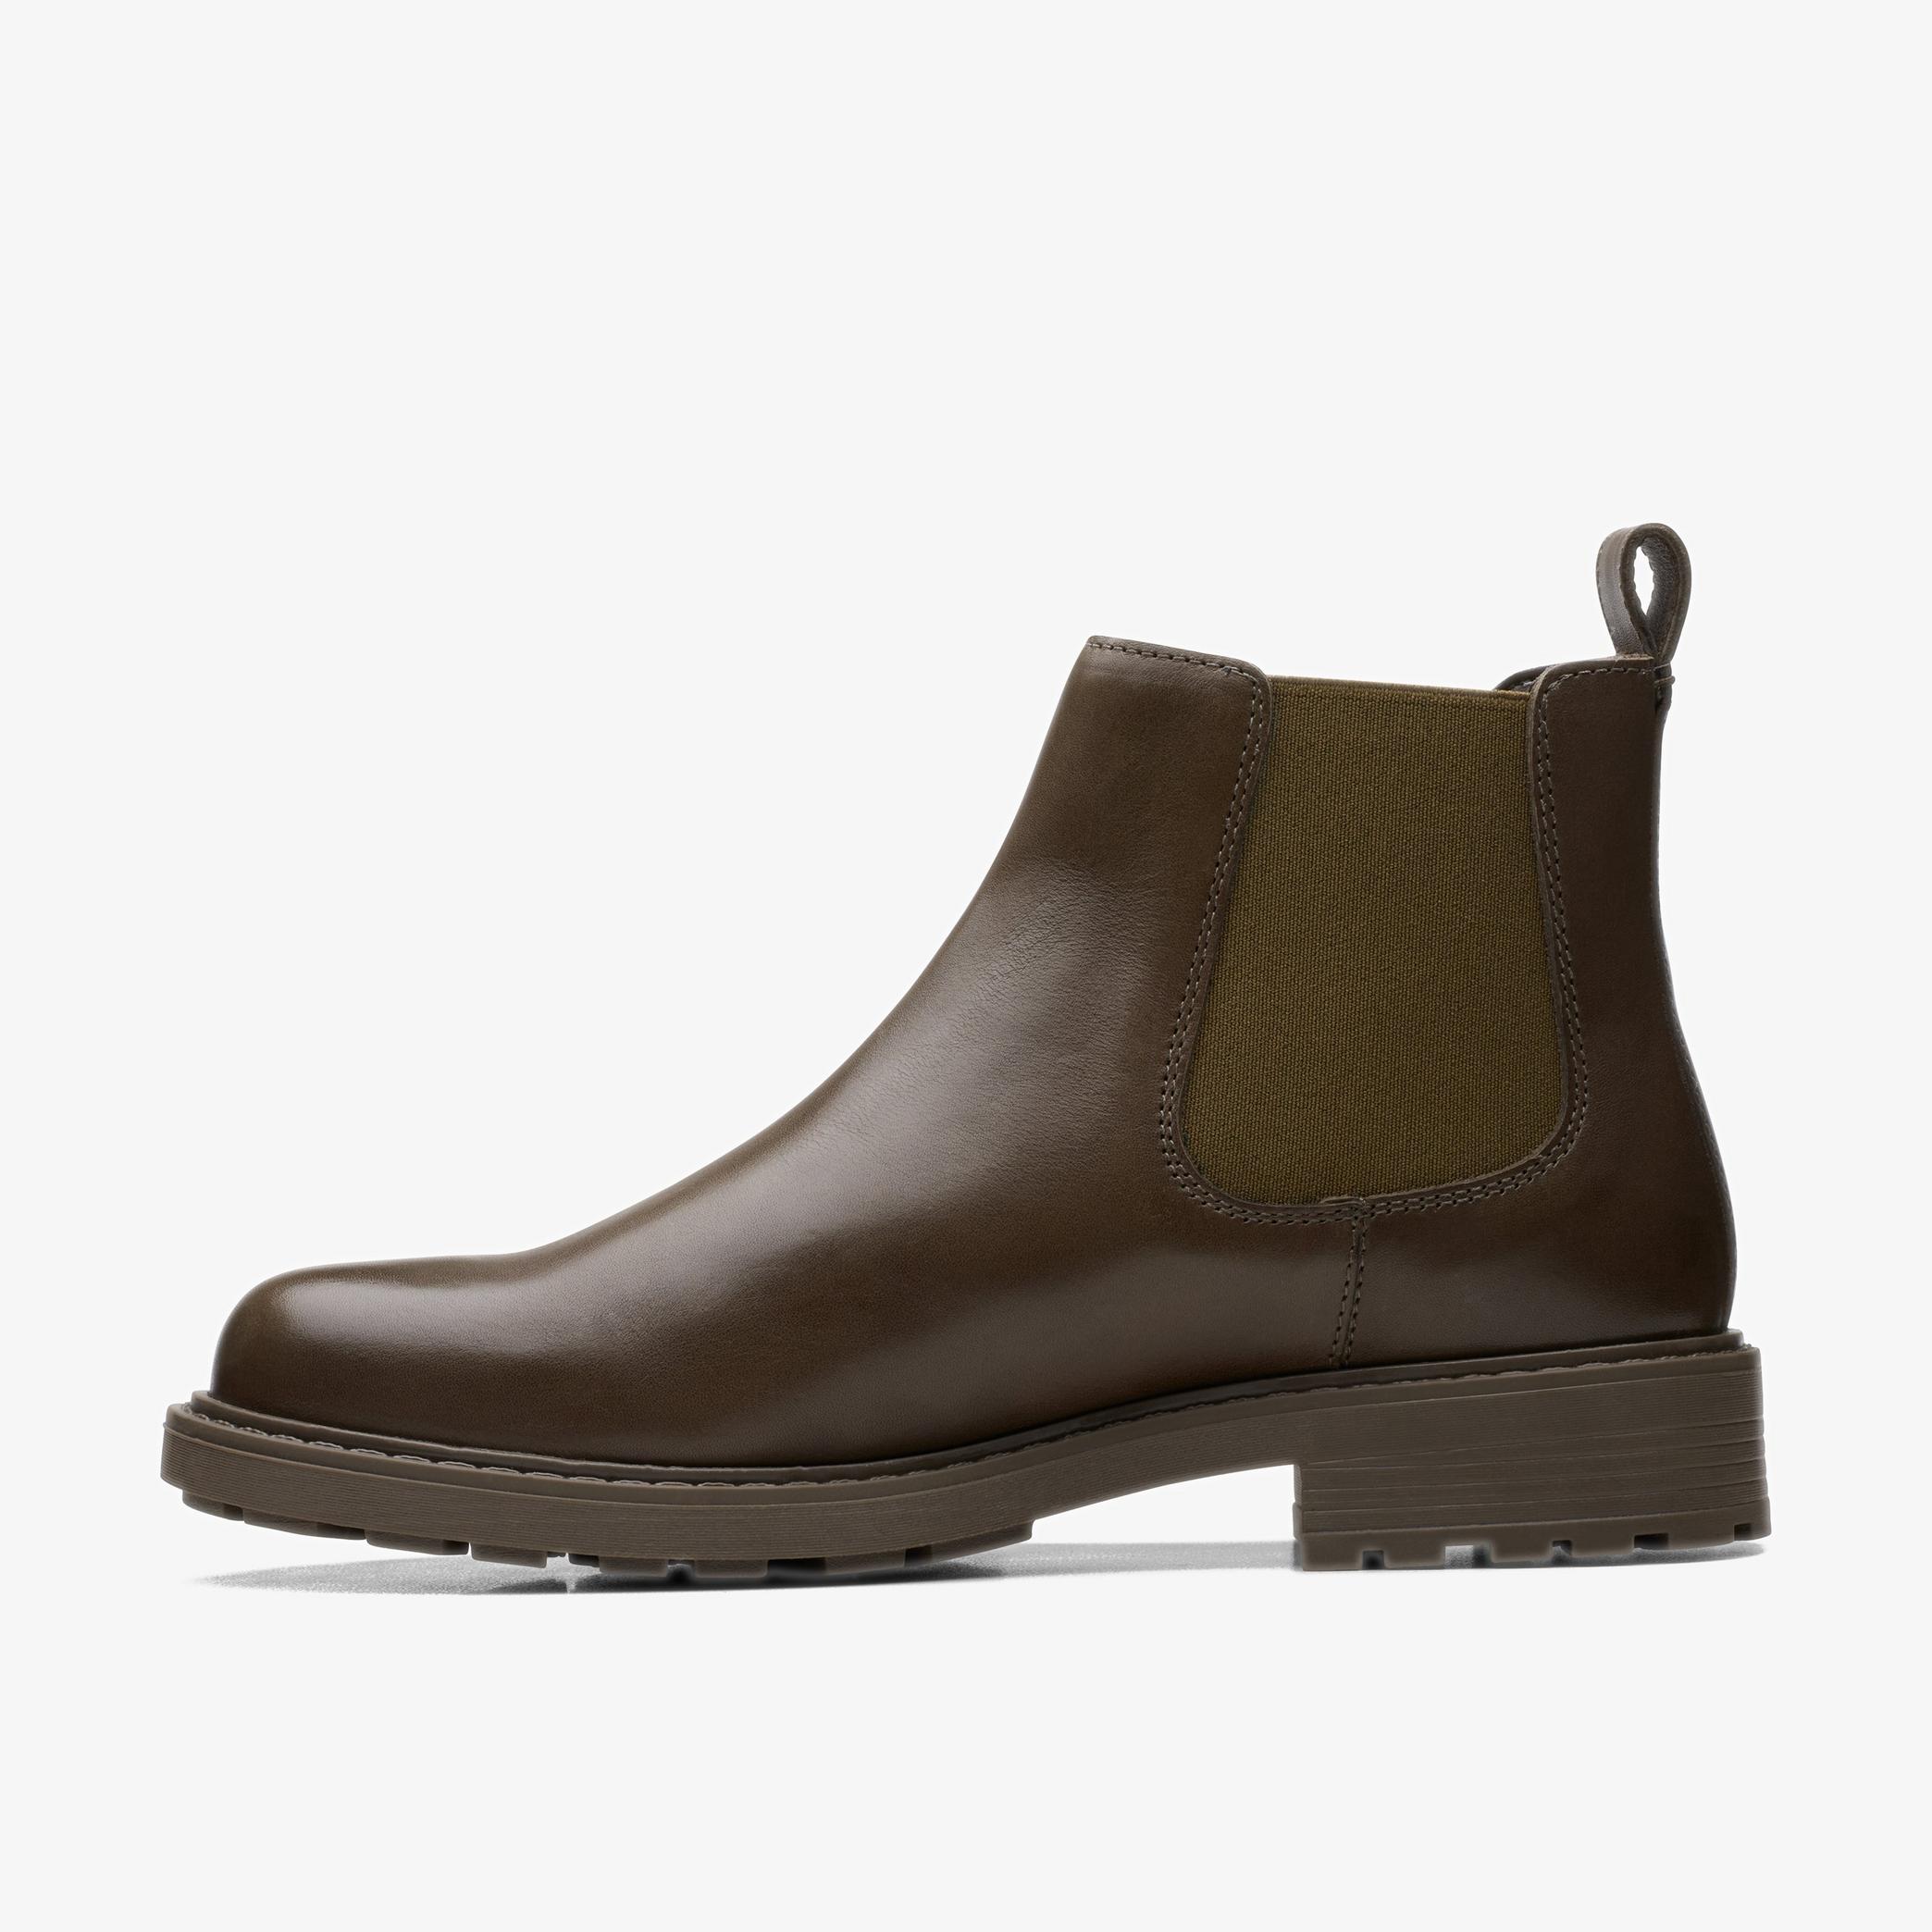 Orinoco2 Lane Dark Olive Leather Ankle Boots, view 2 of 6